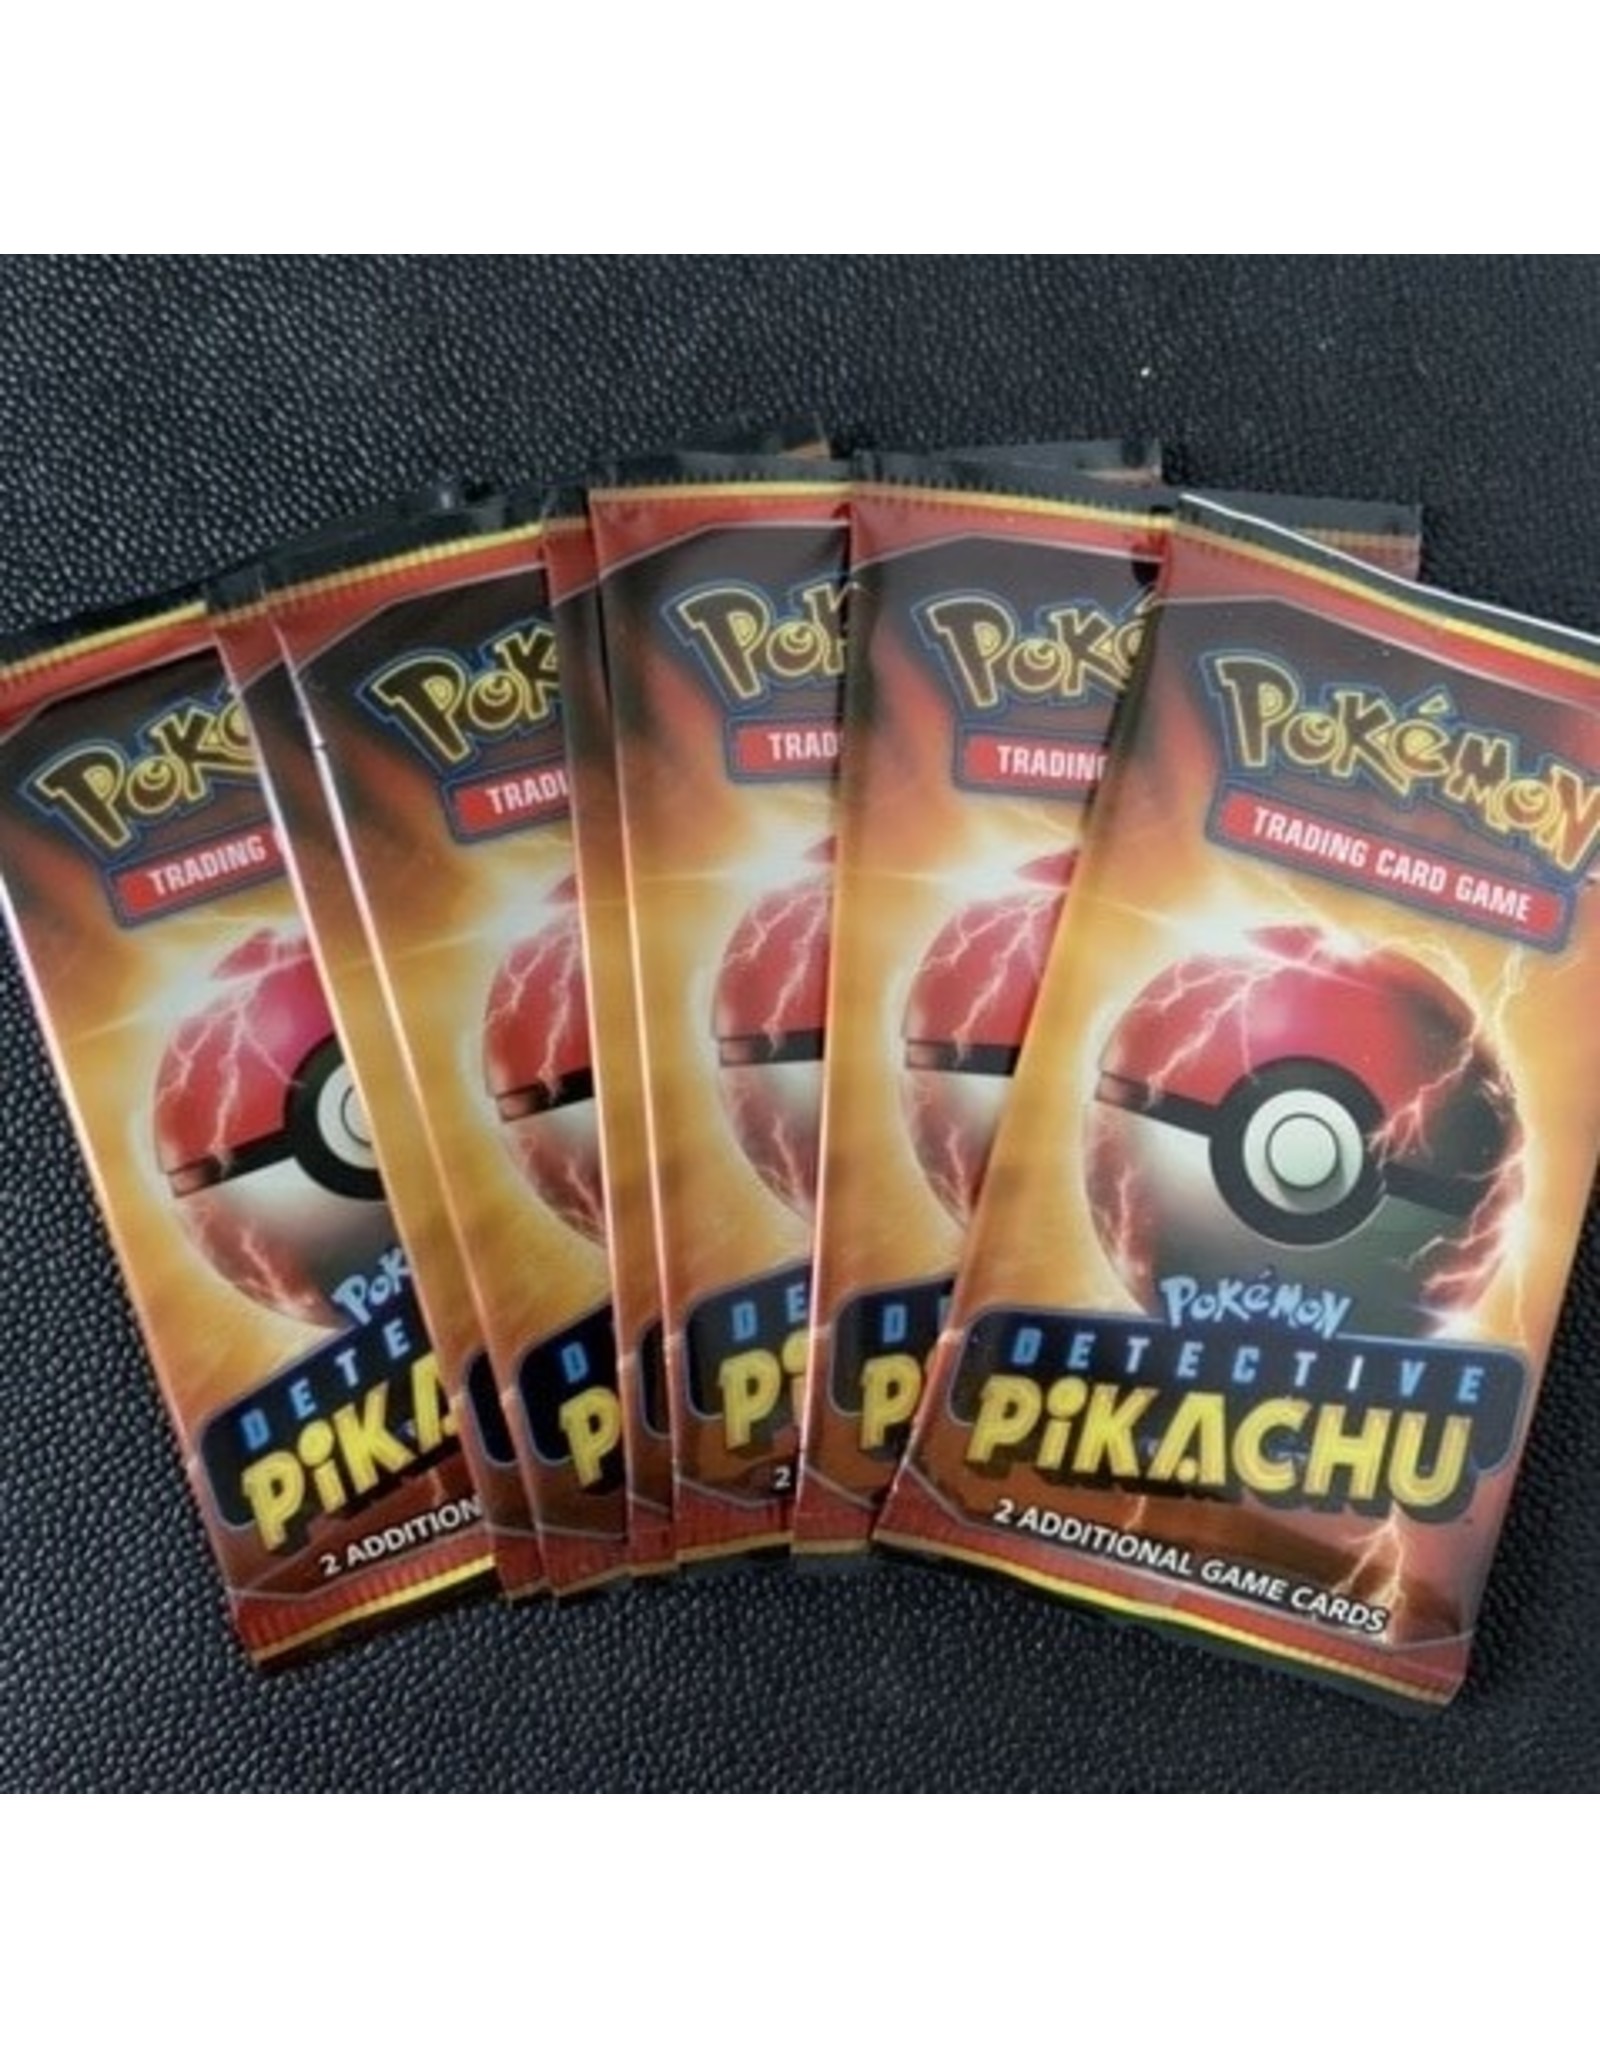 Detective Pikachu movie theater booster